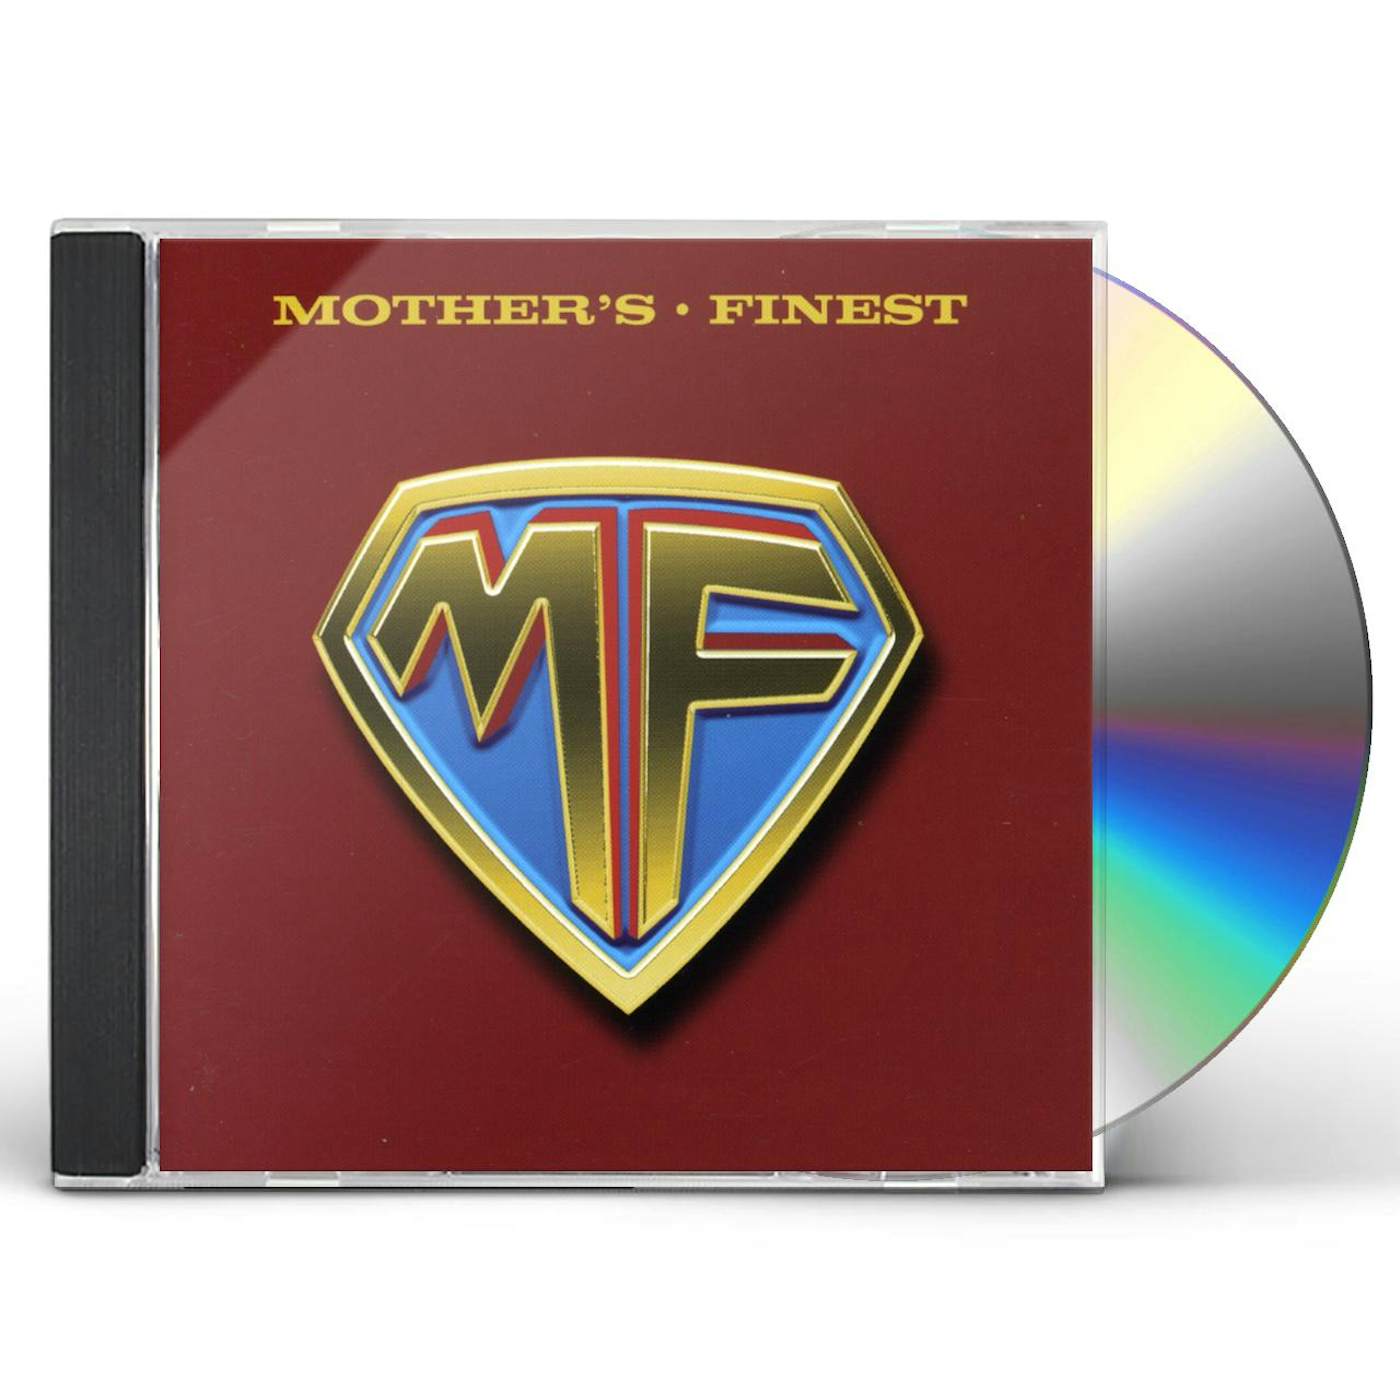 MOTHER'S FINEST CD